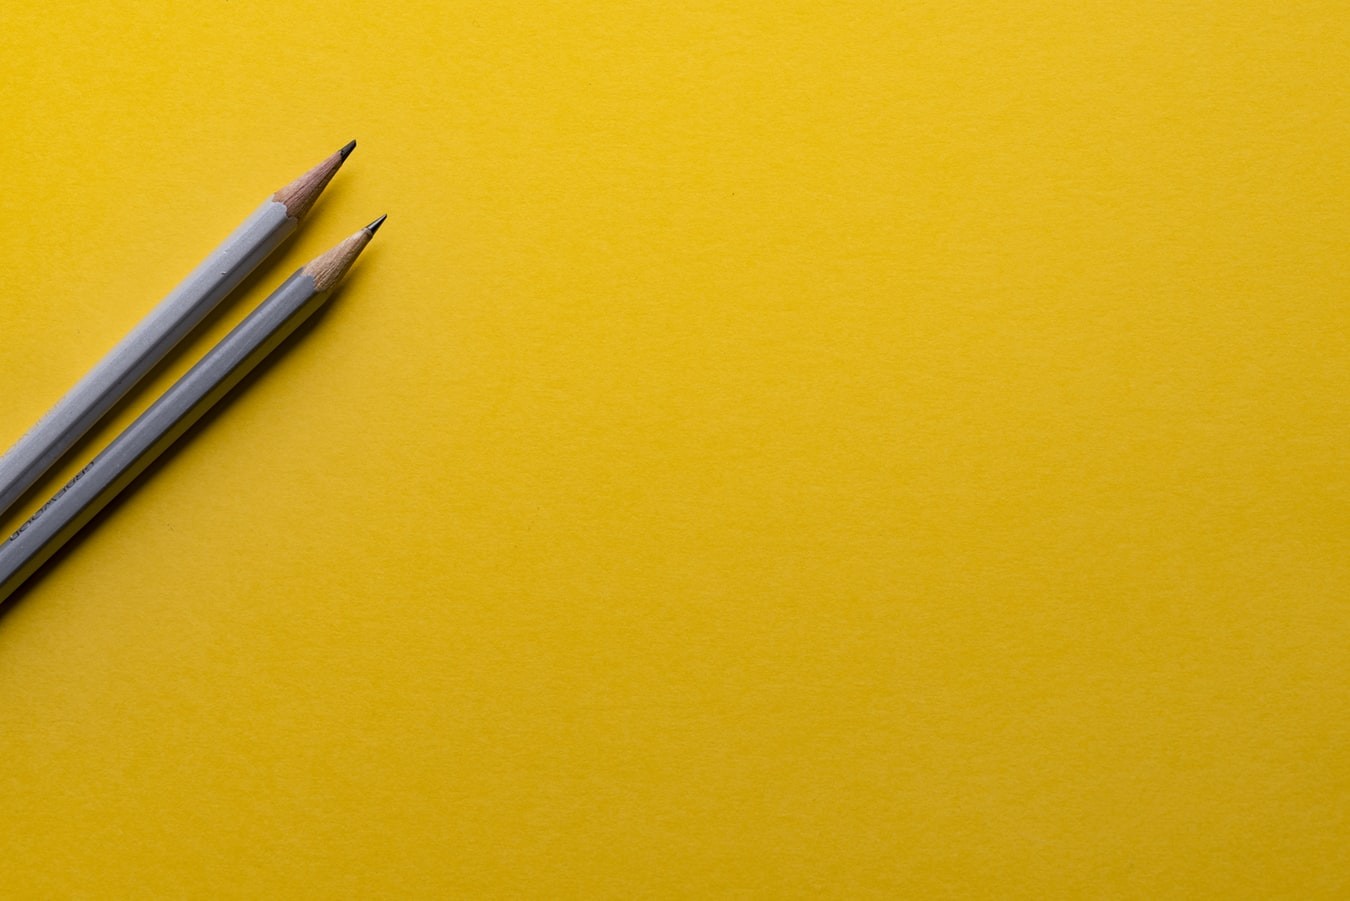 Two gray pencils on a bright yellow background